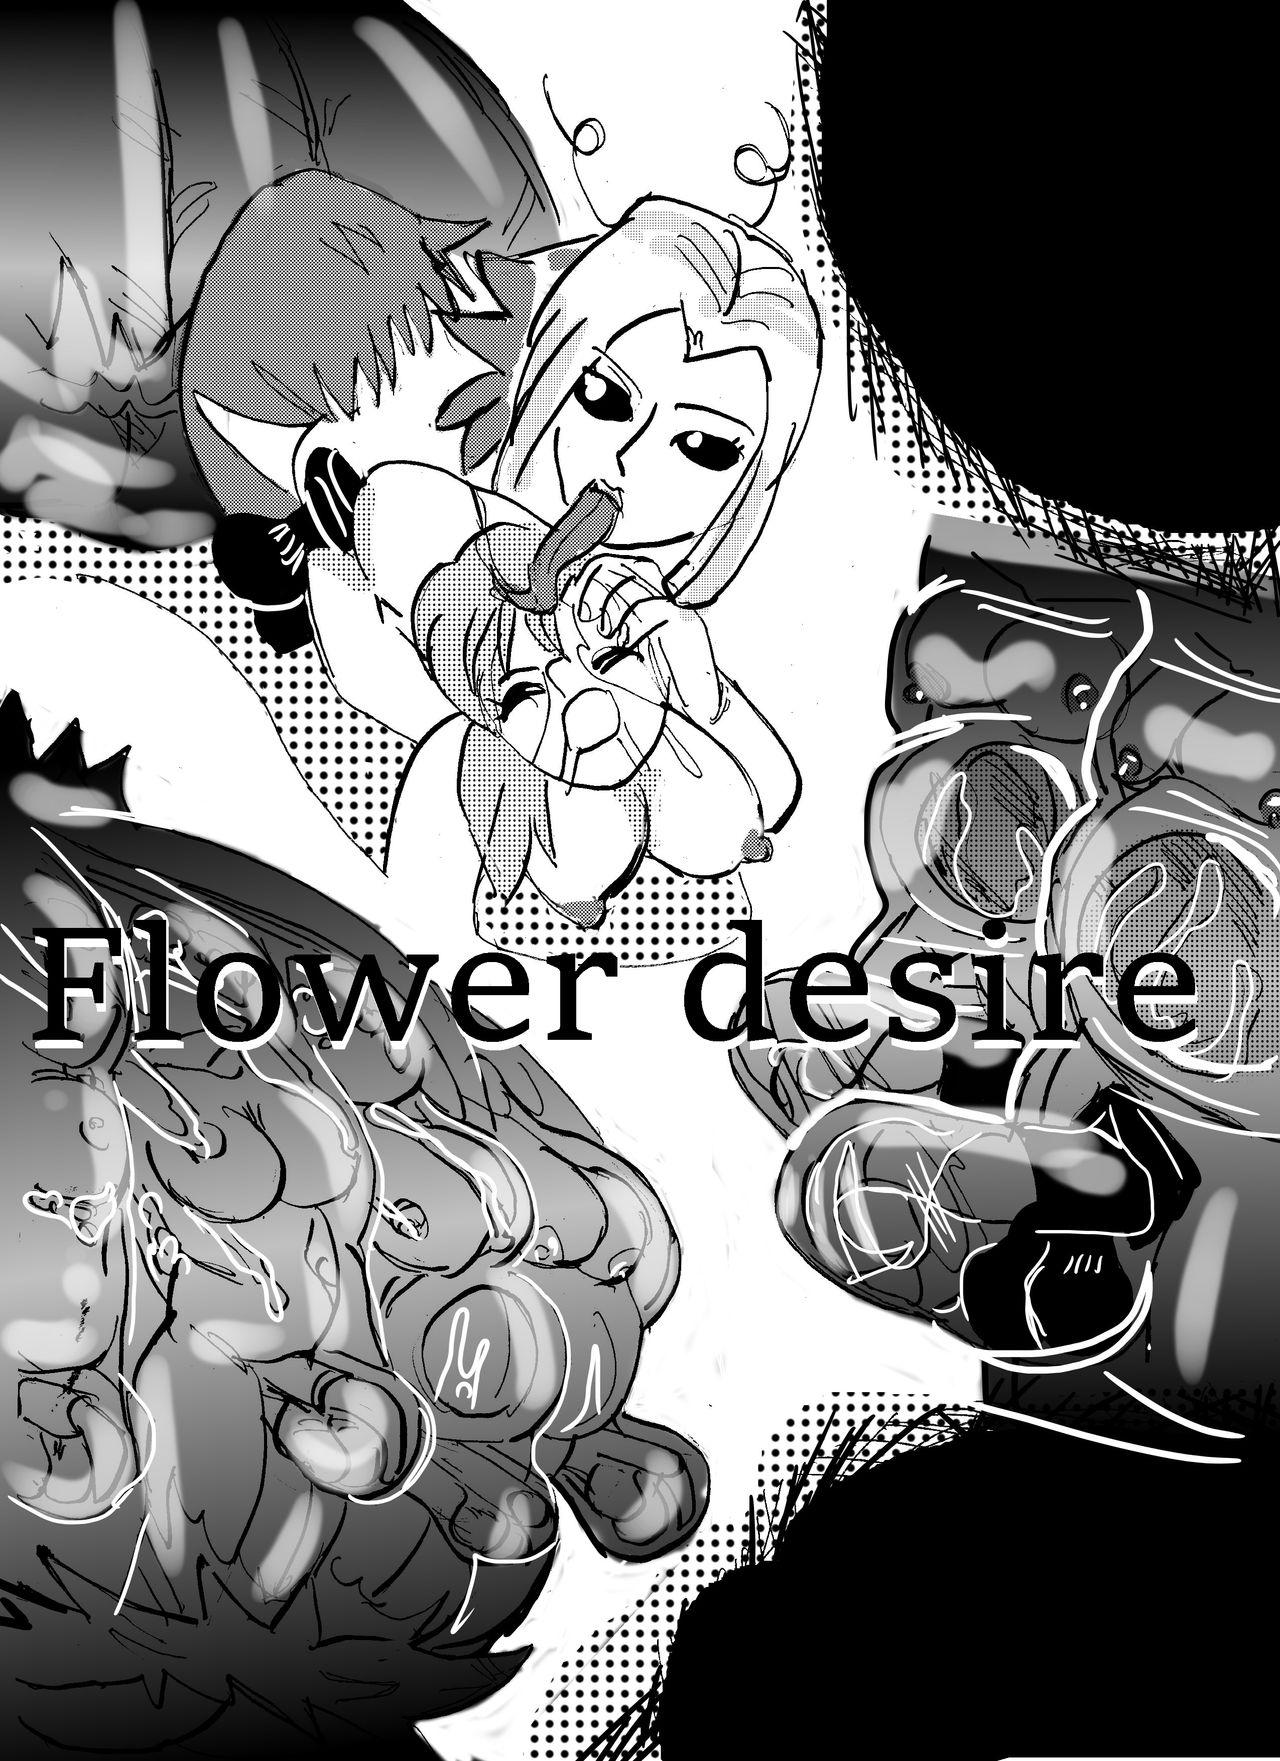 Flower vore "Human and plant heterosexual ra*e and seed bed" 0